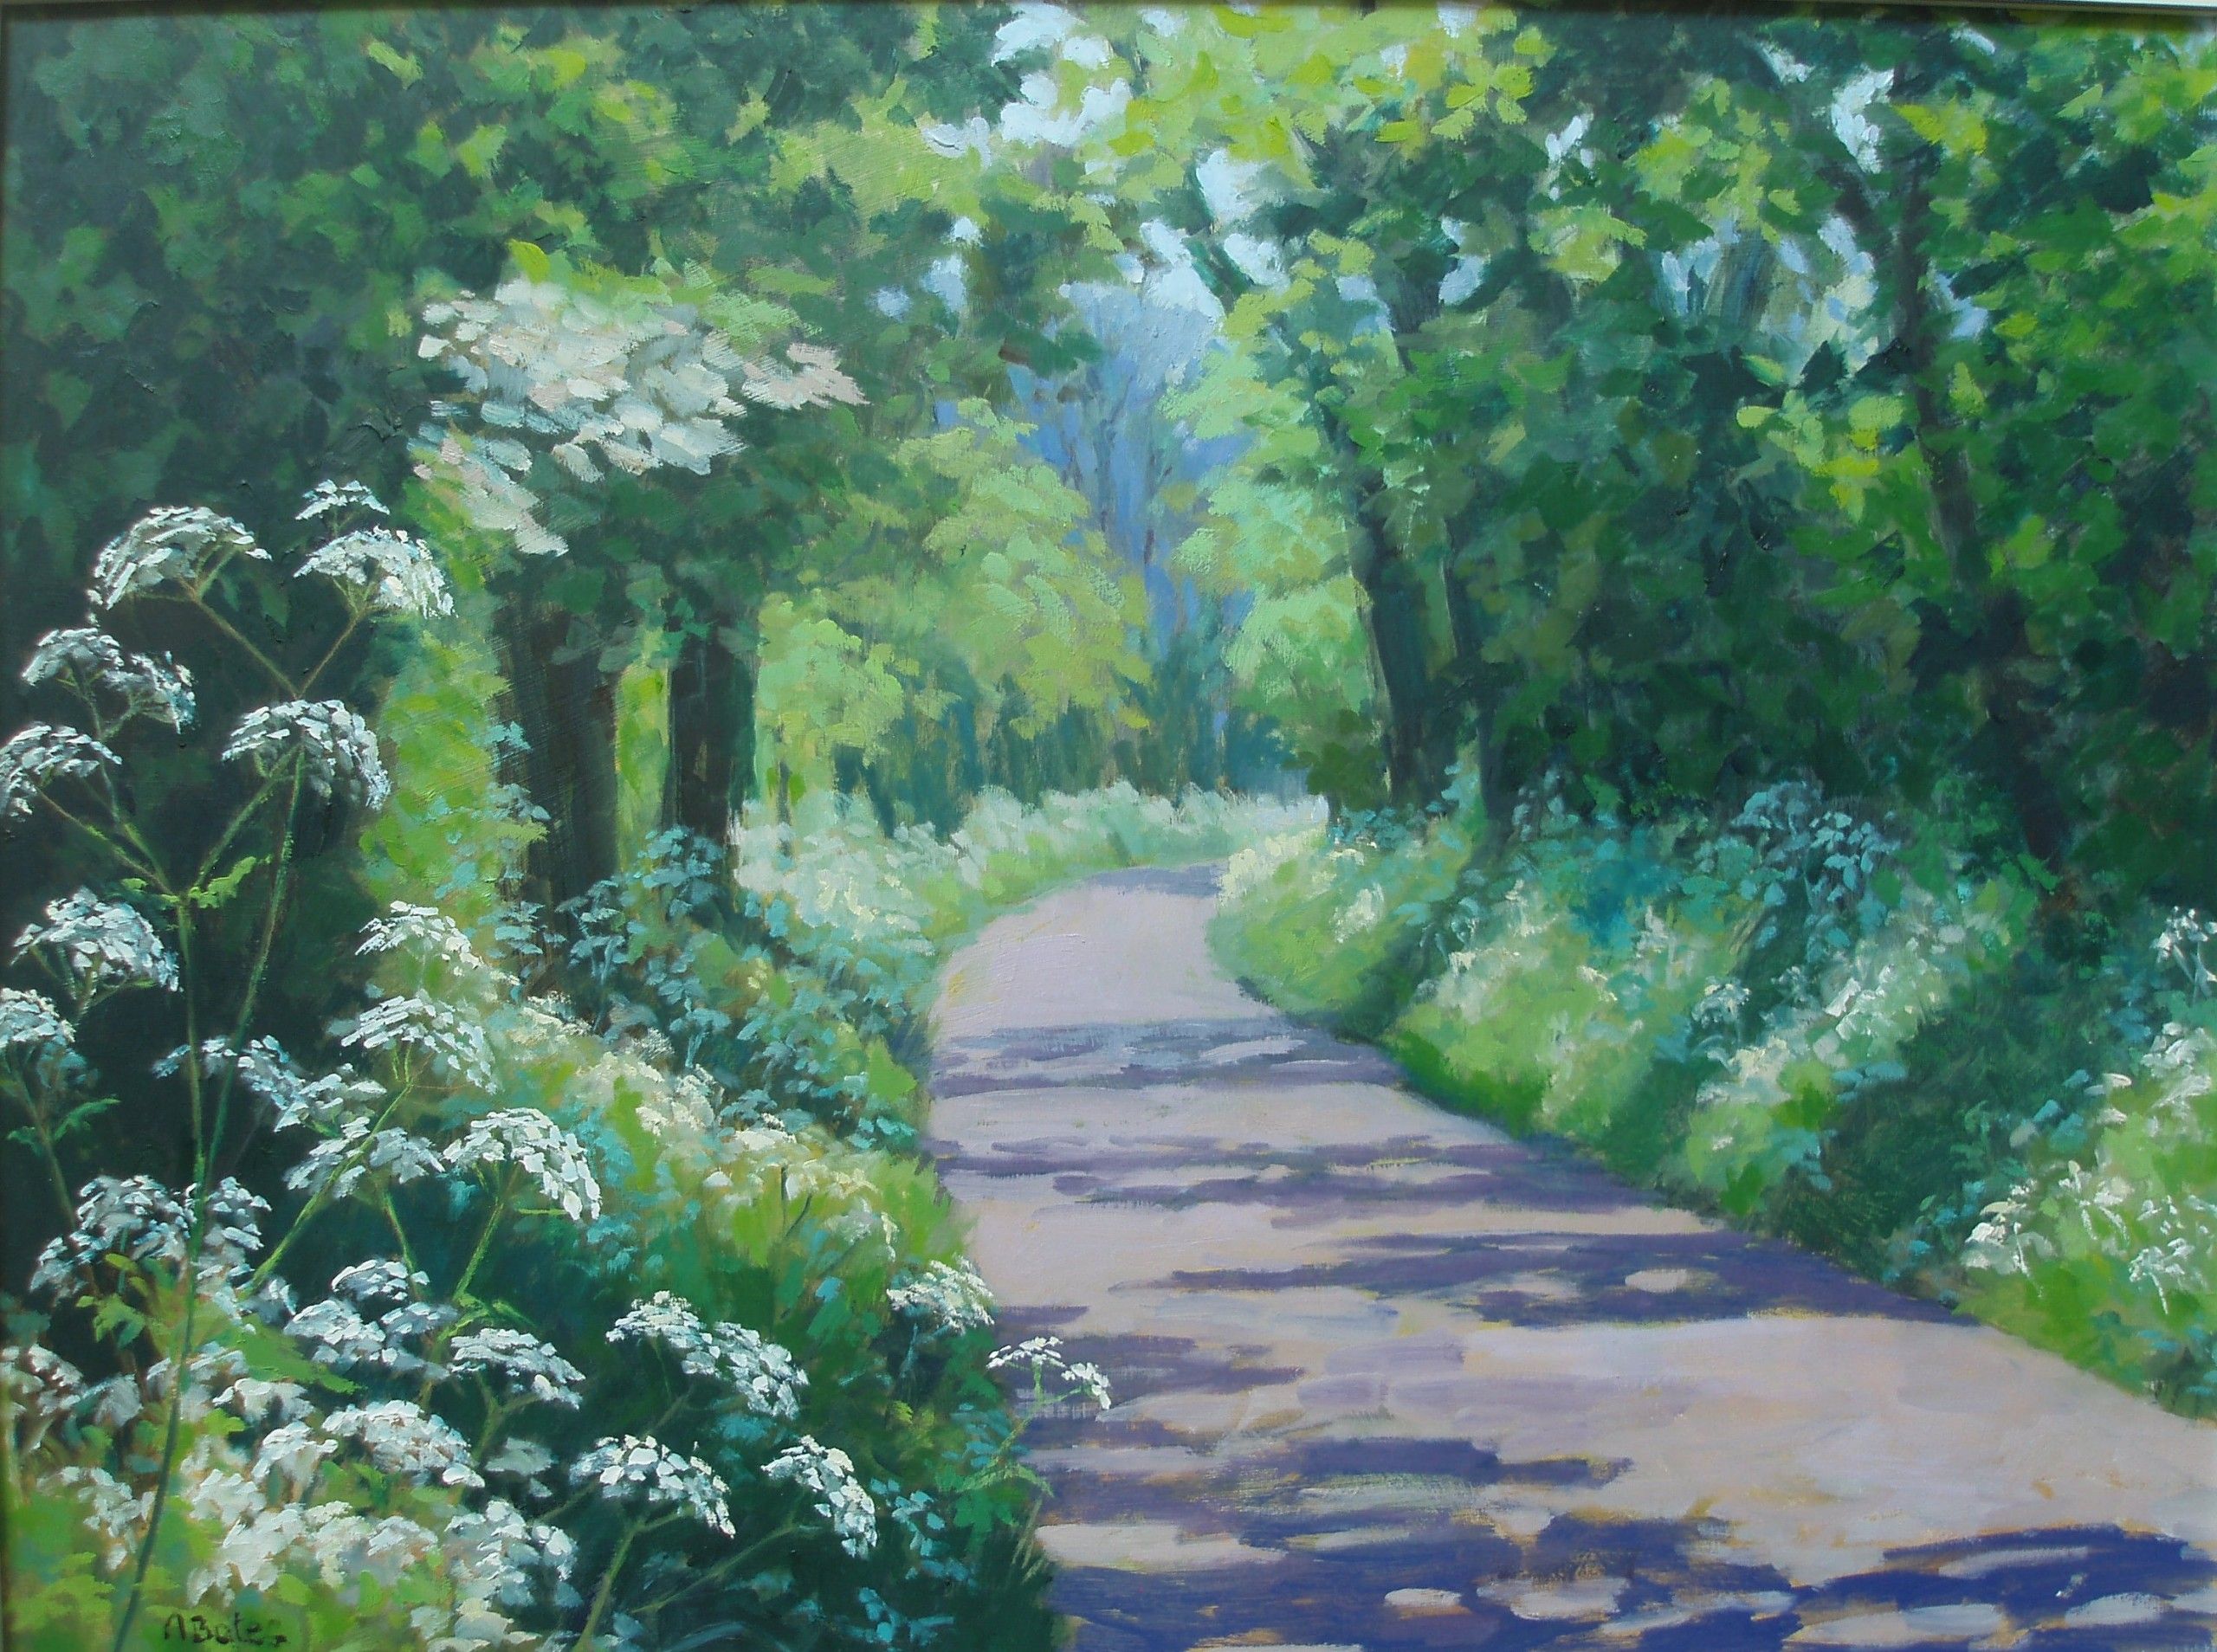 Cow Parsley in May by Andrea Bates